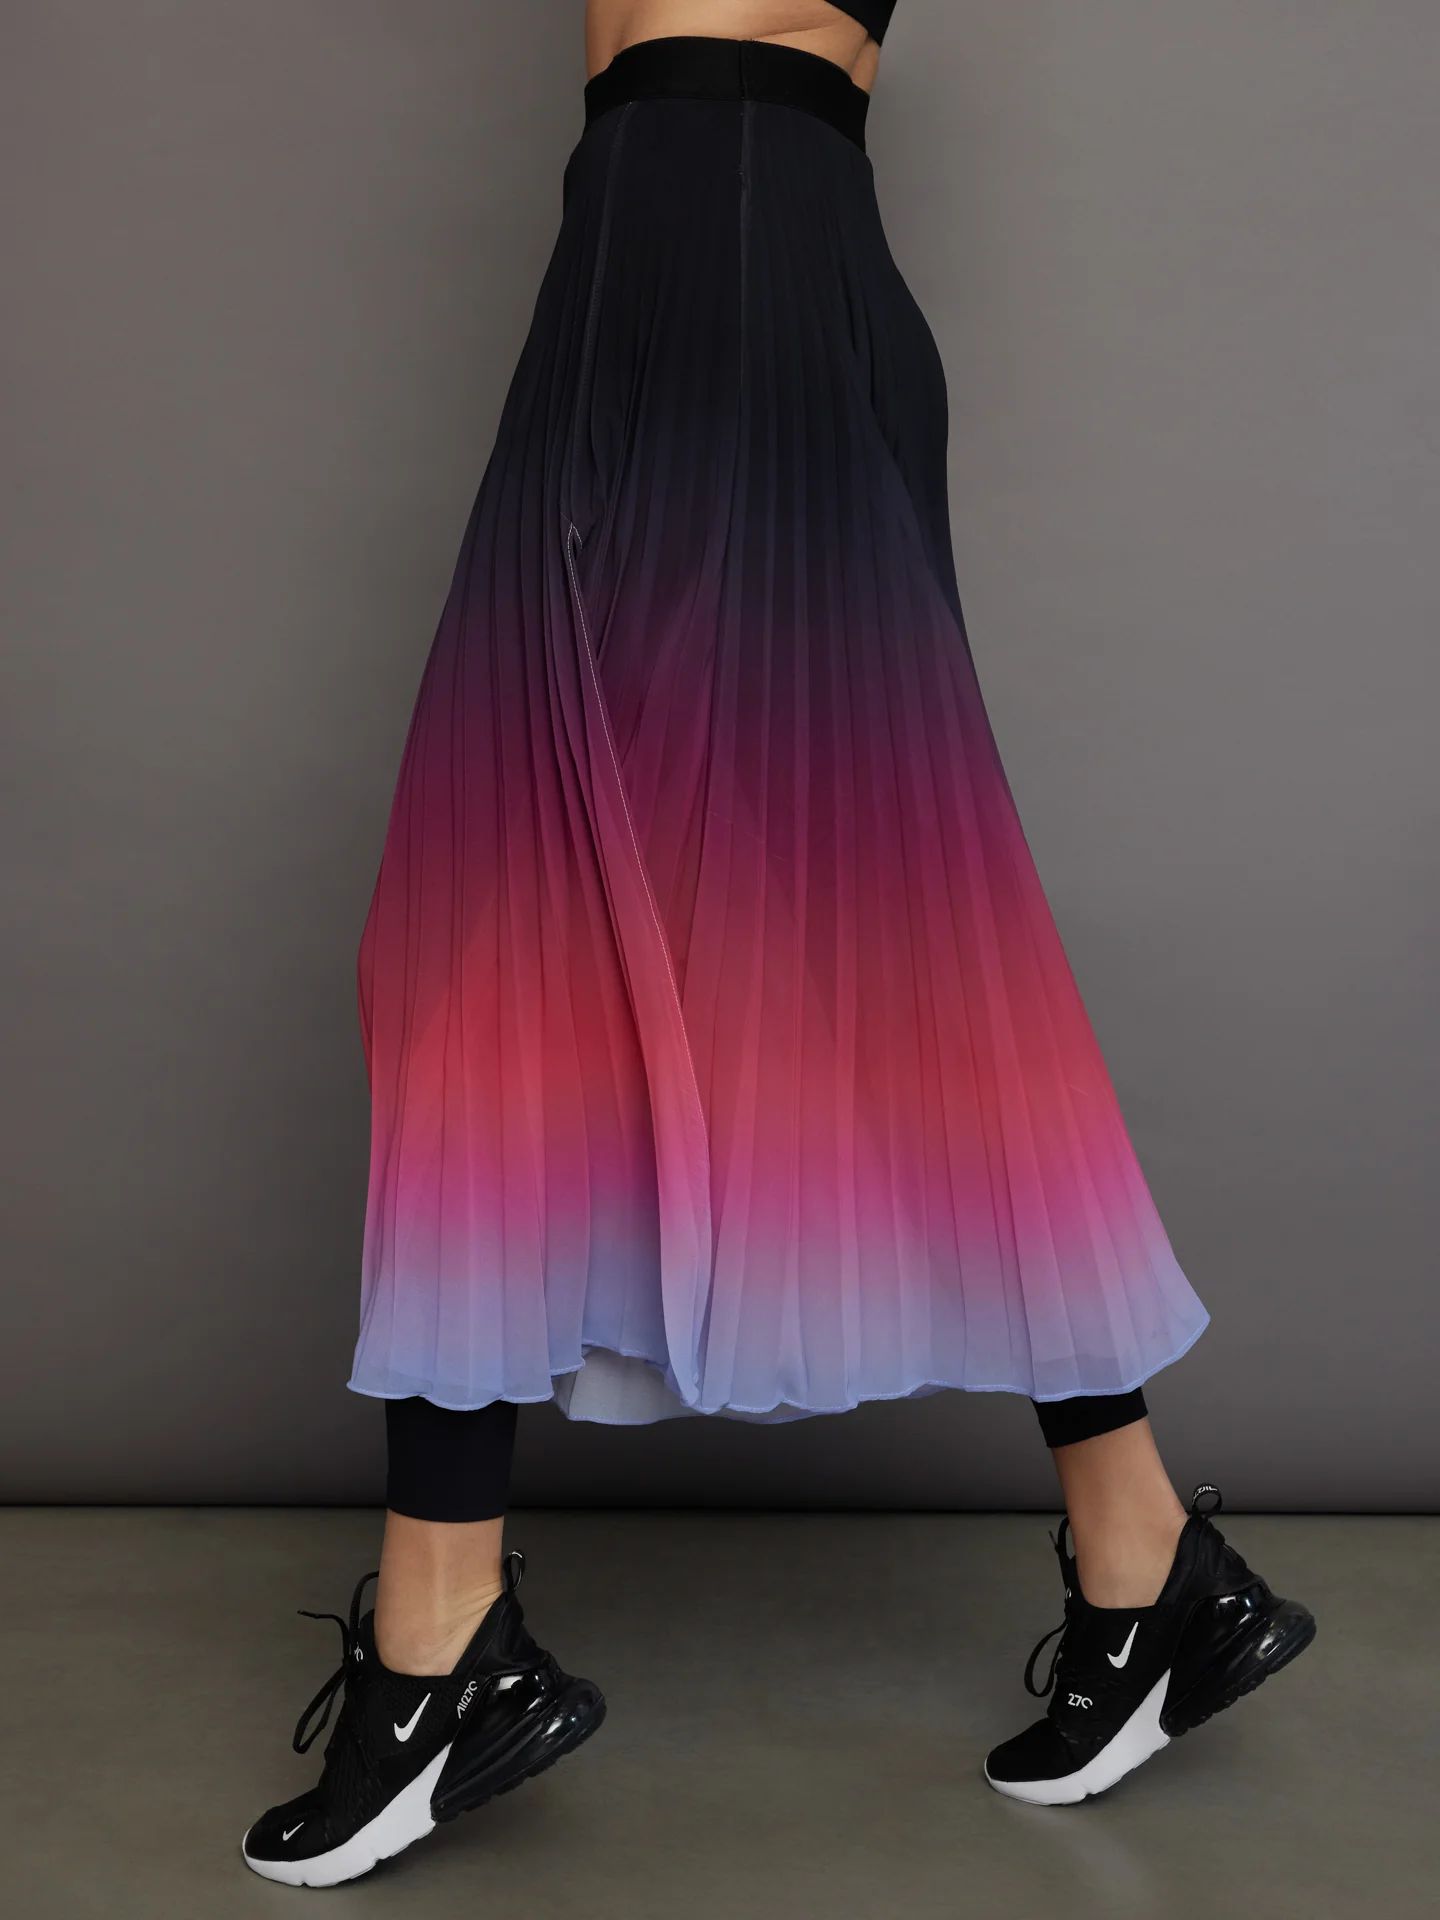 Ombre Pleated Skirt - Black Ombre | Carbon38